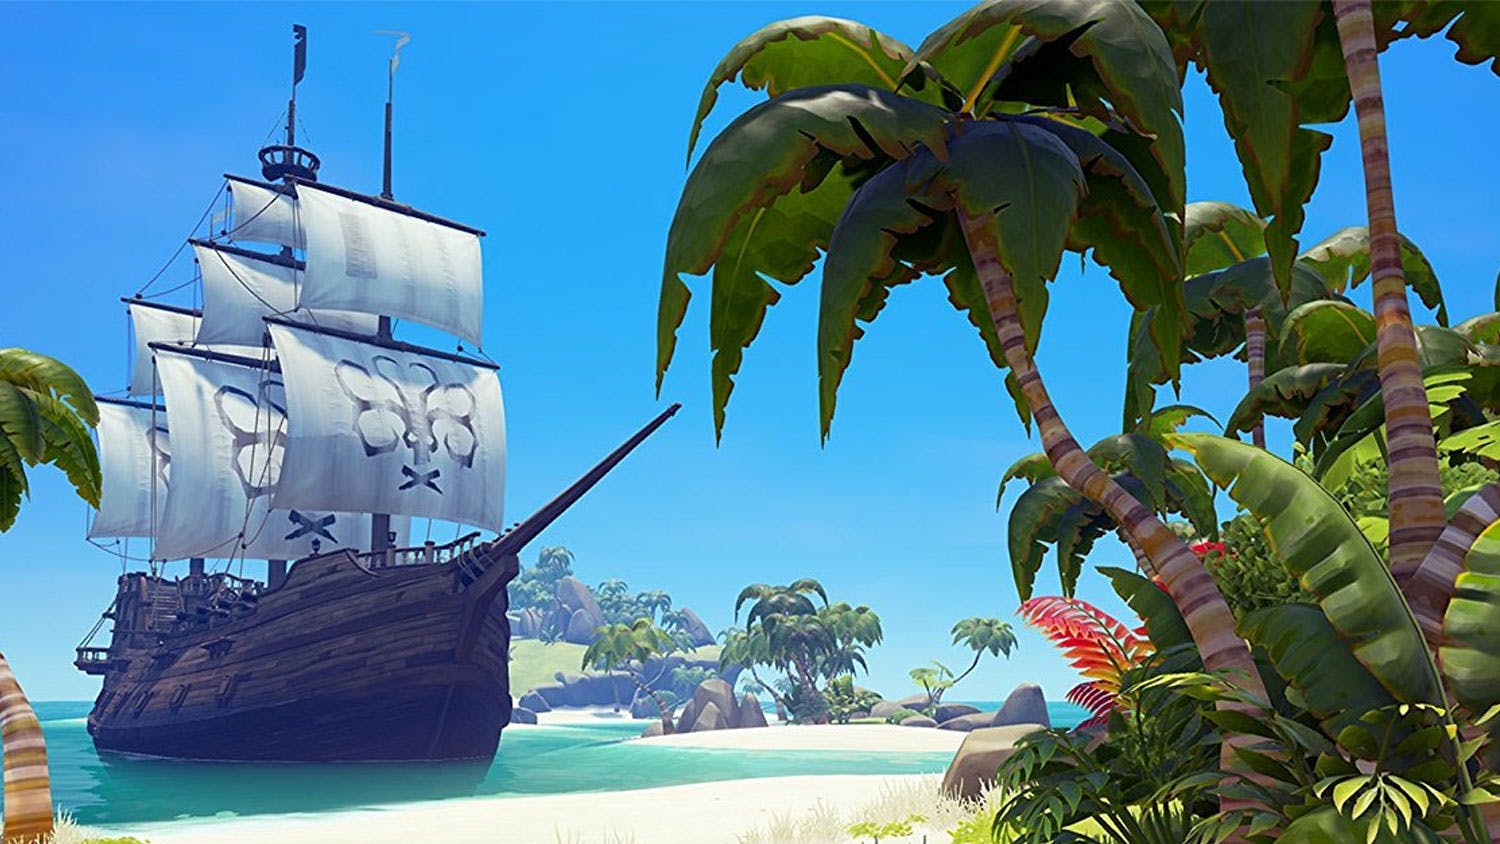 The Glory of the Sea of Thieves